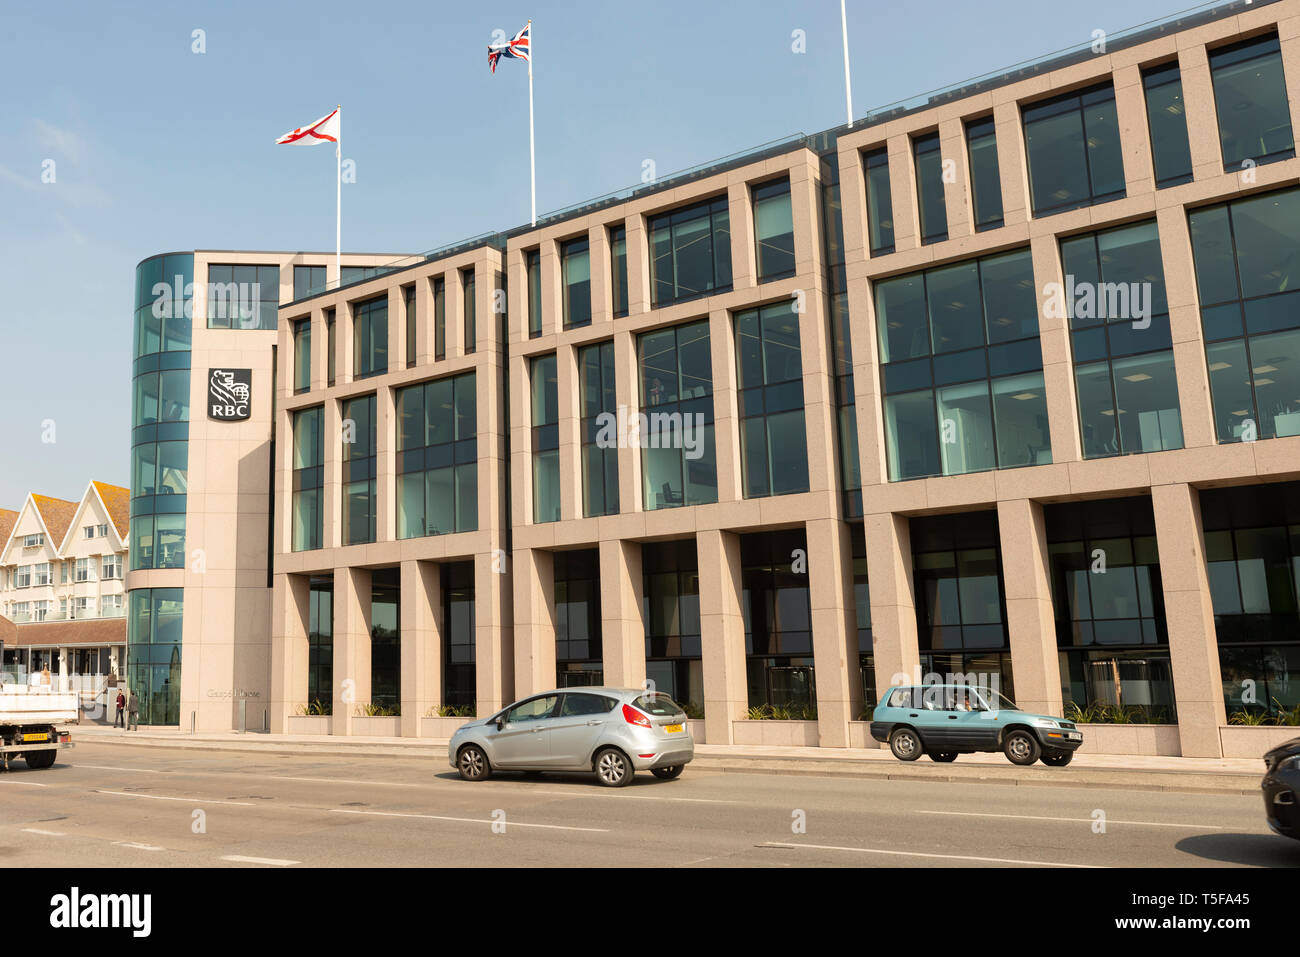 Rbc st helier hi-res stock photography and images - Alamy